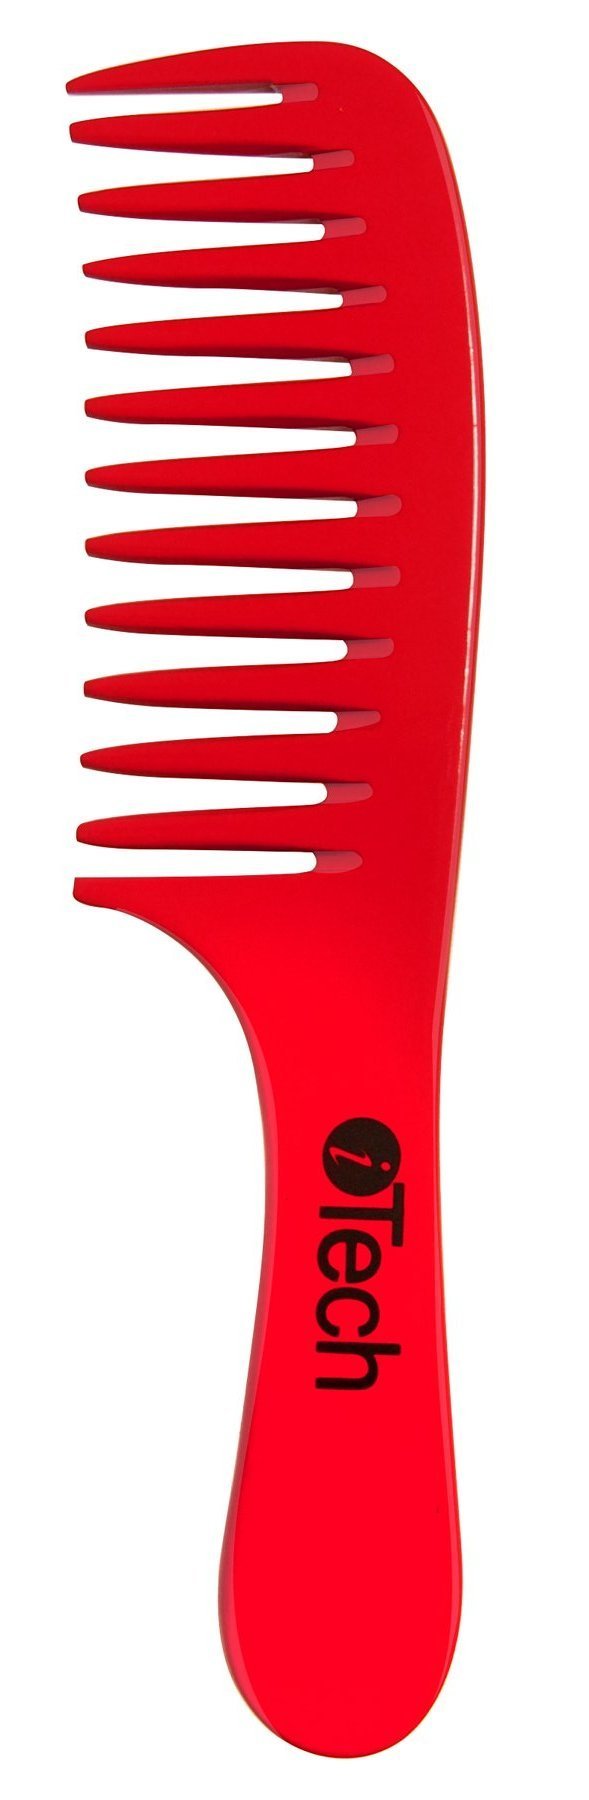 Comb-Out Comb - iTech Collection HairArt Int'l Inc.